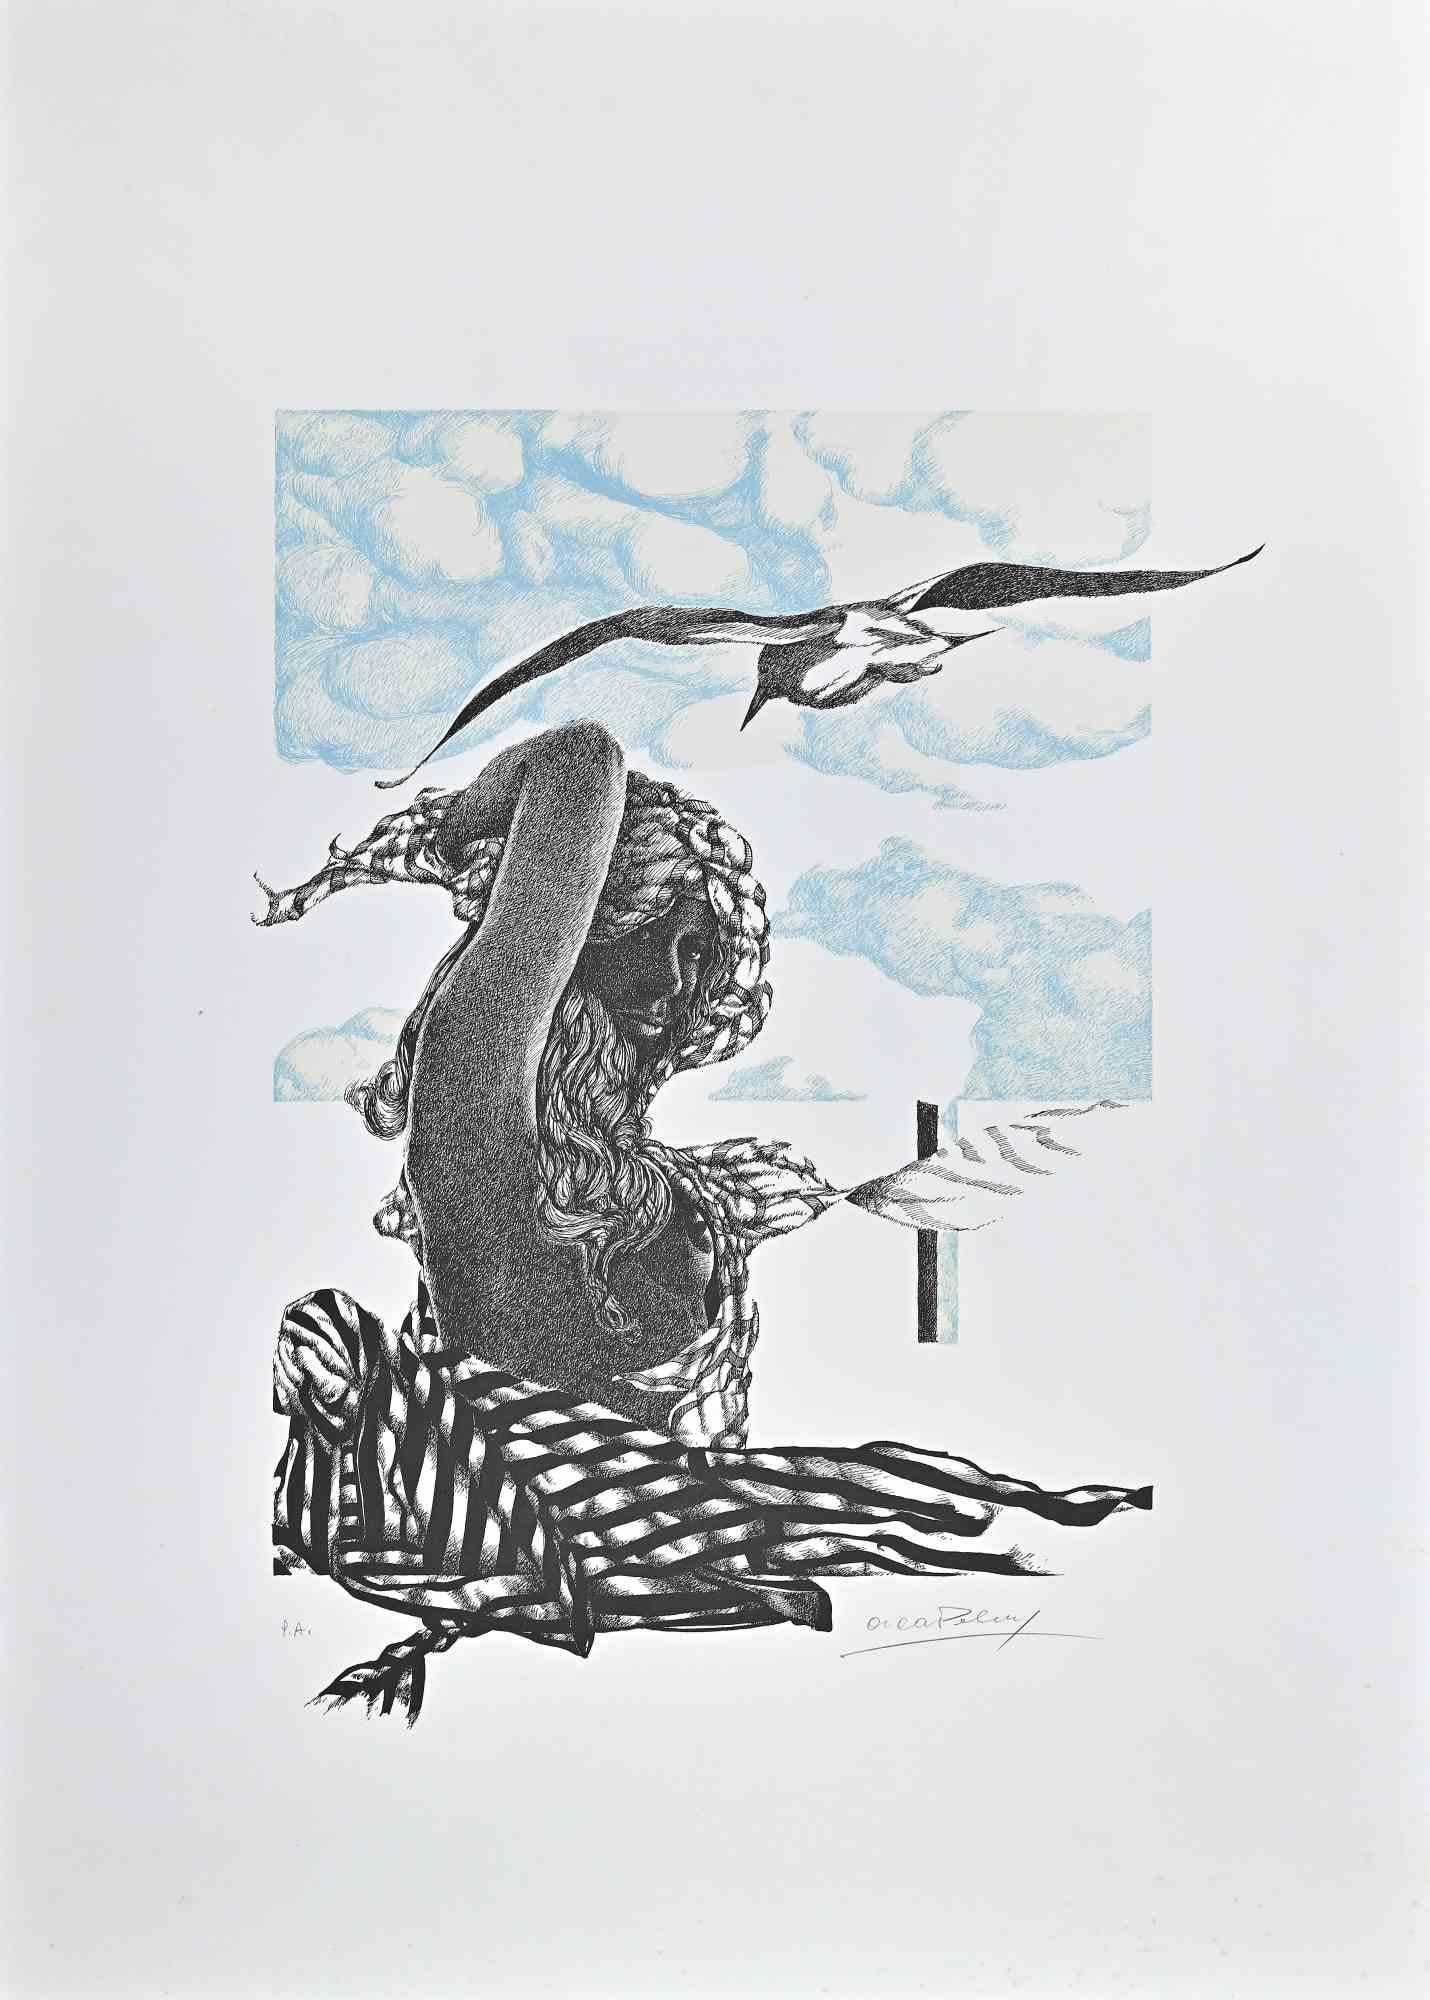 The Woman With Bird - Lithograph by Oscar Pelosi - 1980s